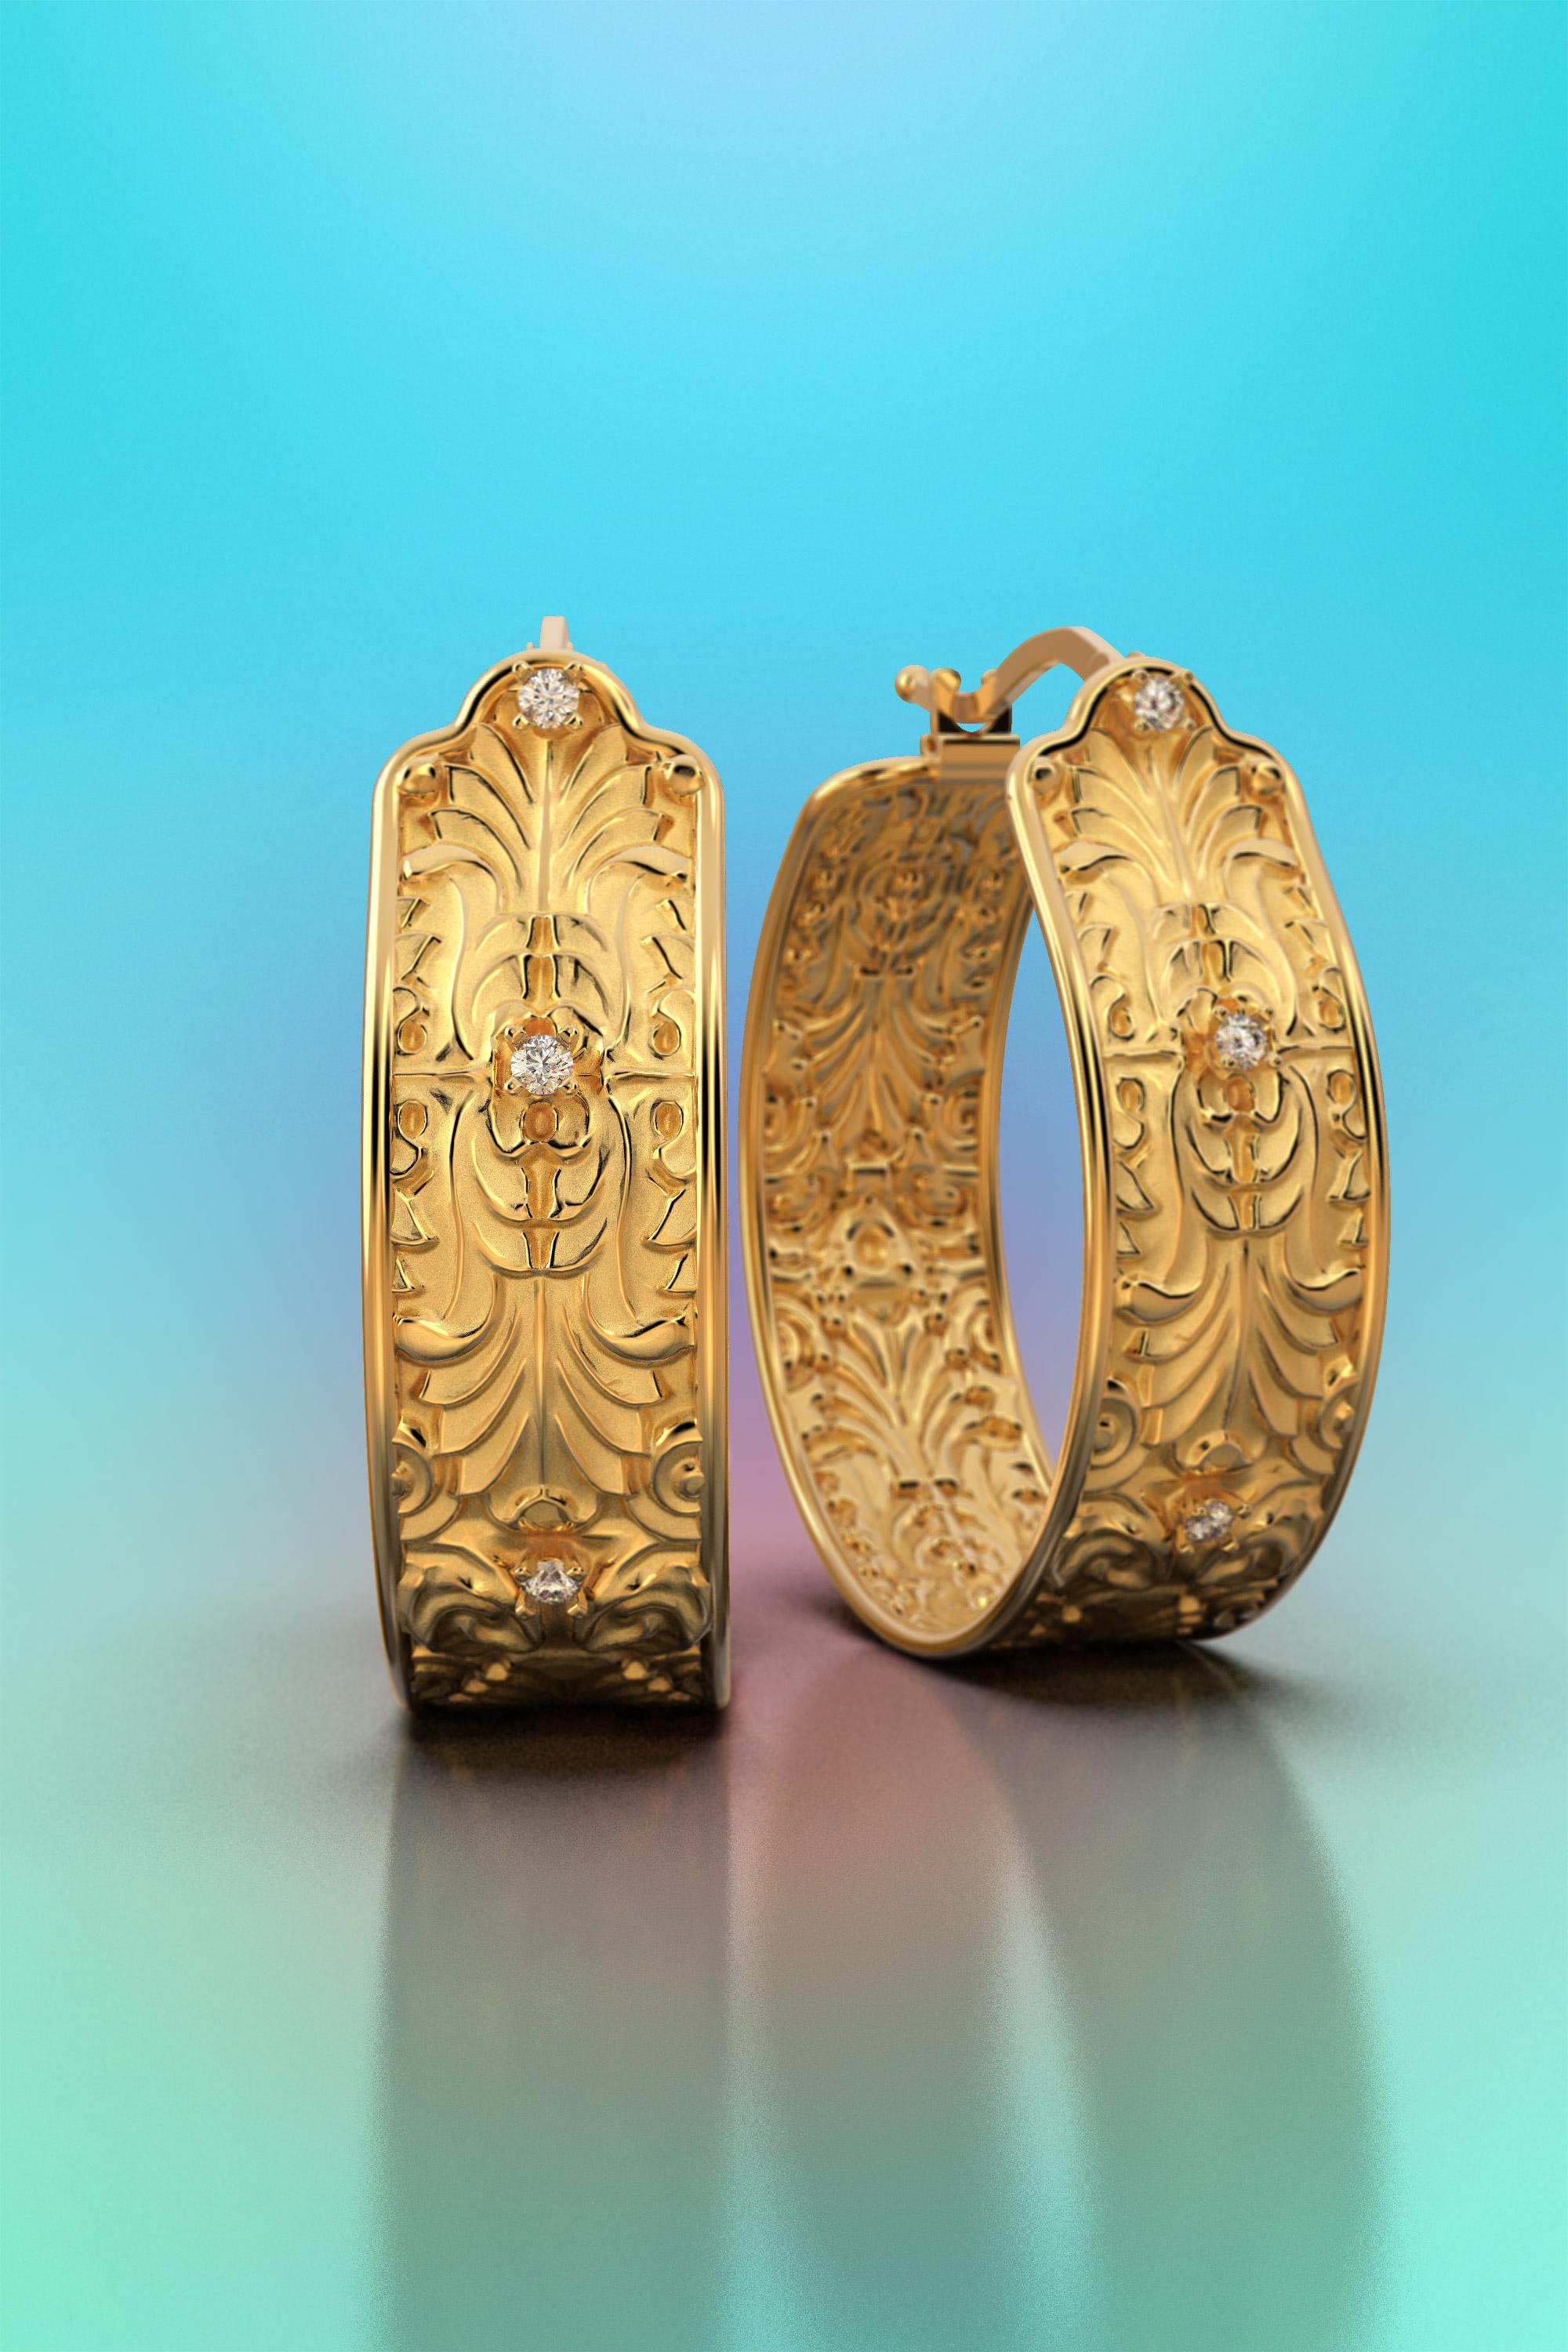 Brilliant Cut Oltremare Gioielli Baroque Hoop Earrings in 14k Gold with natural Diamonds For Sale